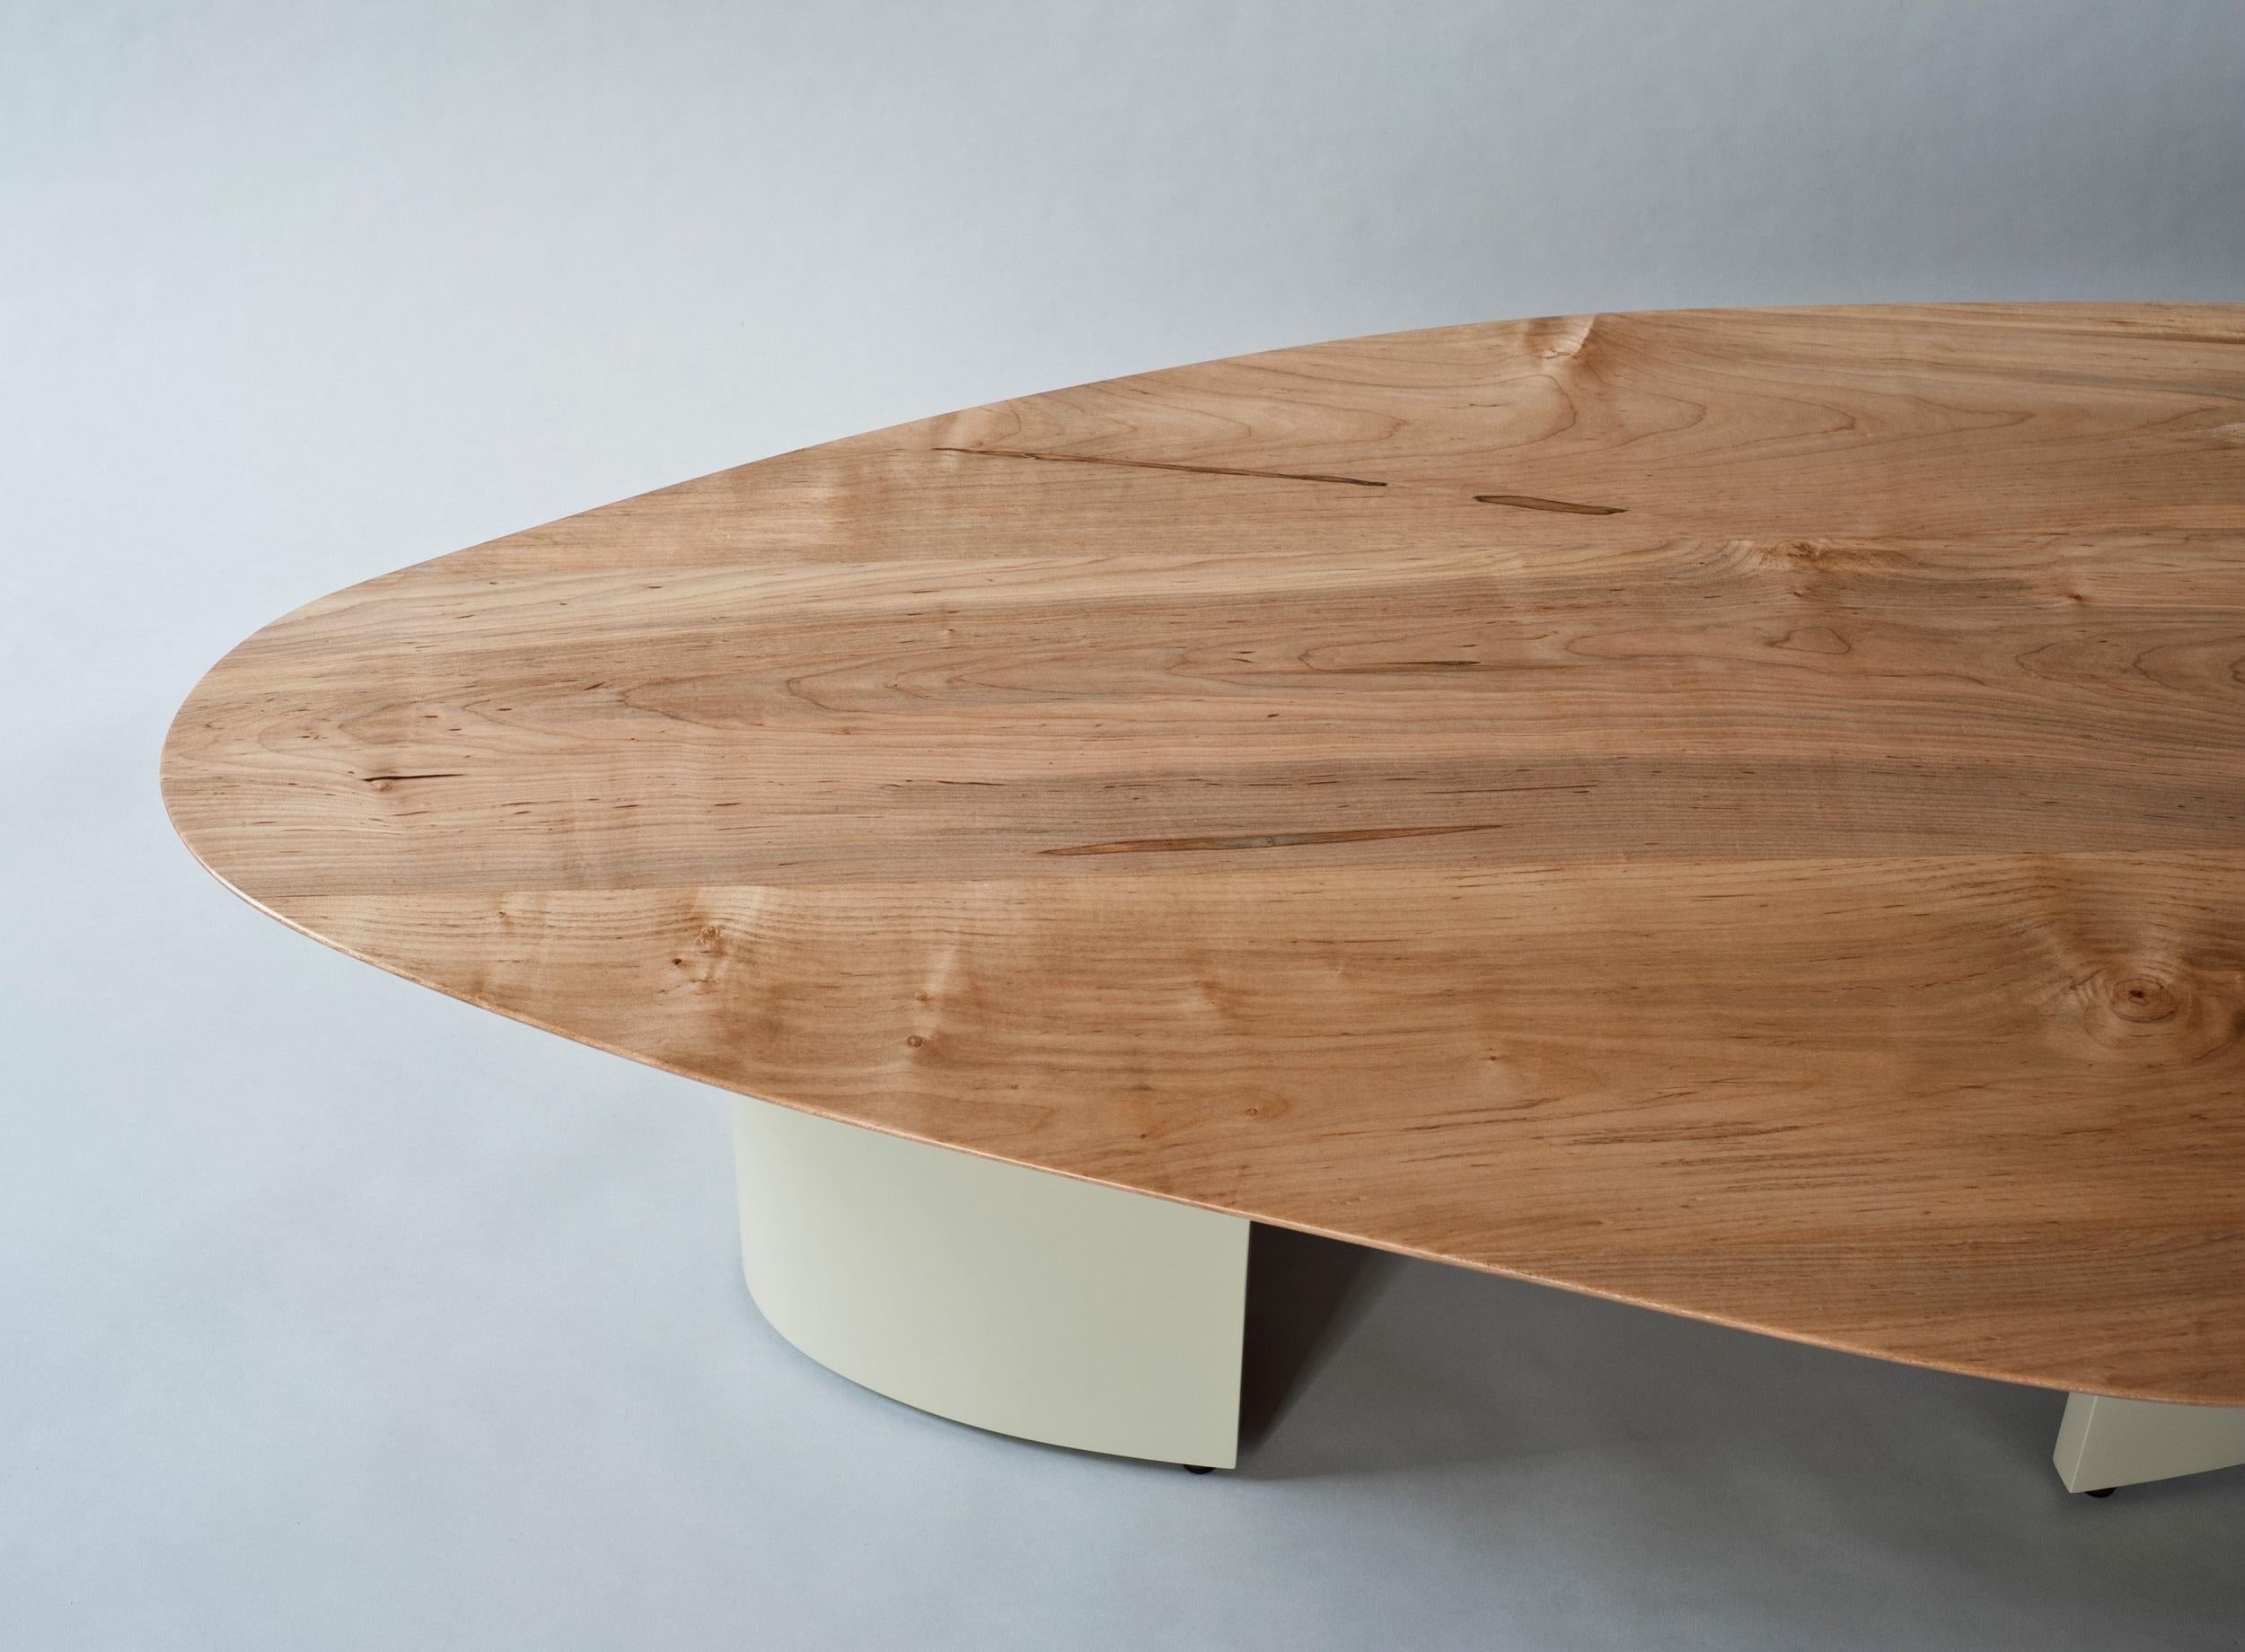 SAMPLE SALE
As Shown. Condition: Excellent.

This is a showroom floor model being sold as-is (not made to order). For made-to-order items, please reference the original item listing.

Sculptural solid maple top with base in pebble grey lacquer.